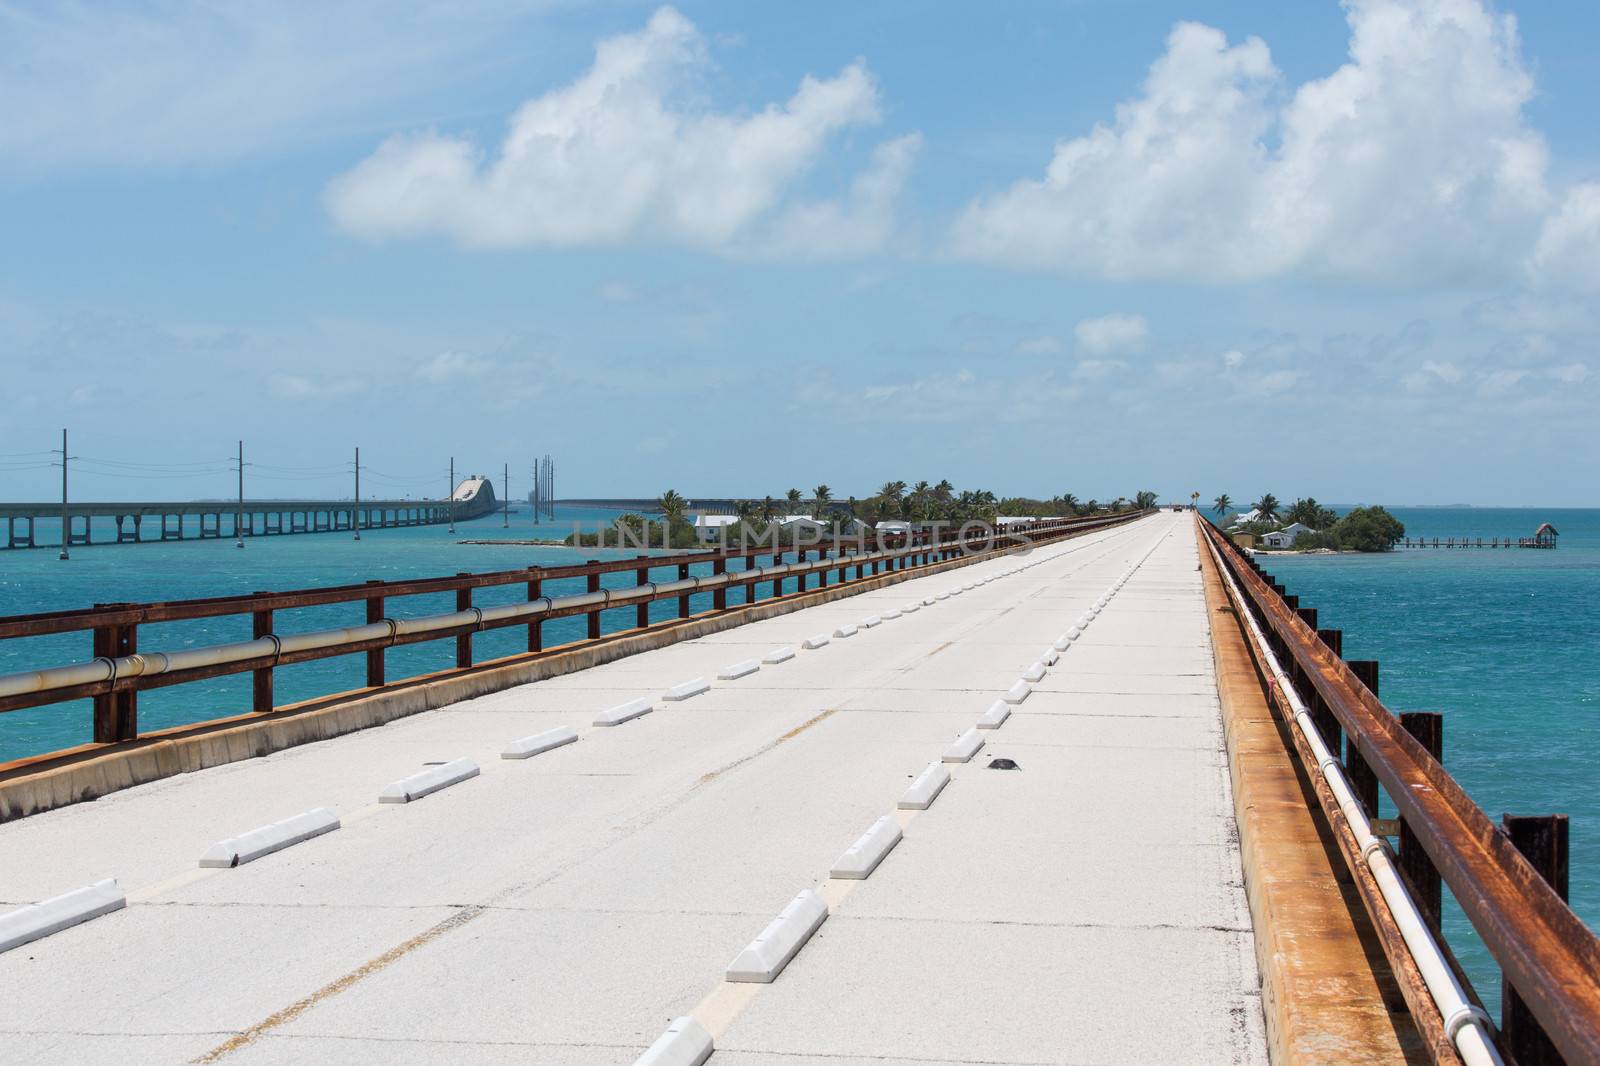 This bridge was built by Henry Flagler as part of the Overseas Railroad to Key West. In the 1935 Labor Day Hurricane the railroad suffered much damage. This bridge was taken over by the state of Florida and converted to part of the Overseas Highway. It has since been replaced by a modern bridge and a 2.2 mile section is now used by walkers and bicyclists for exercise and to get to Pigeon Key. In the photo you can see the old railroad rails are used as handrails.